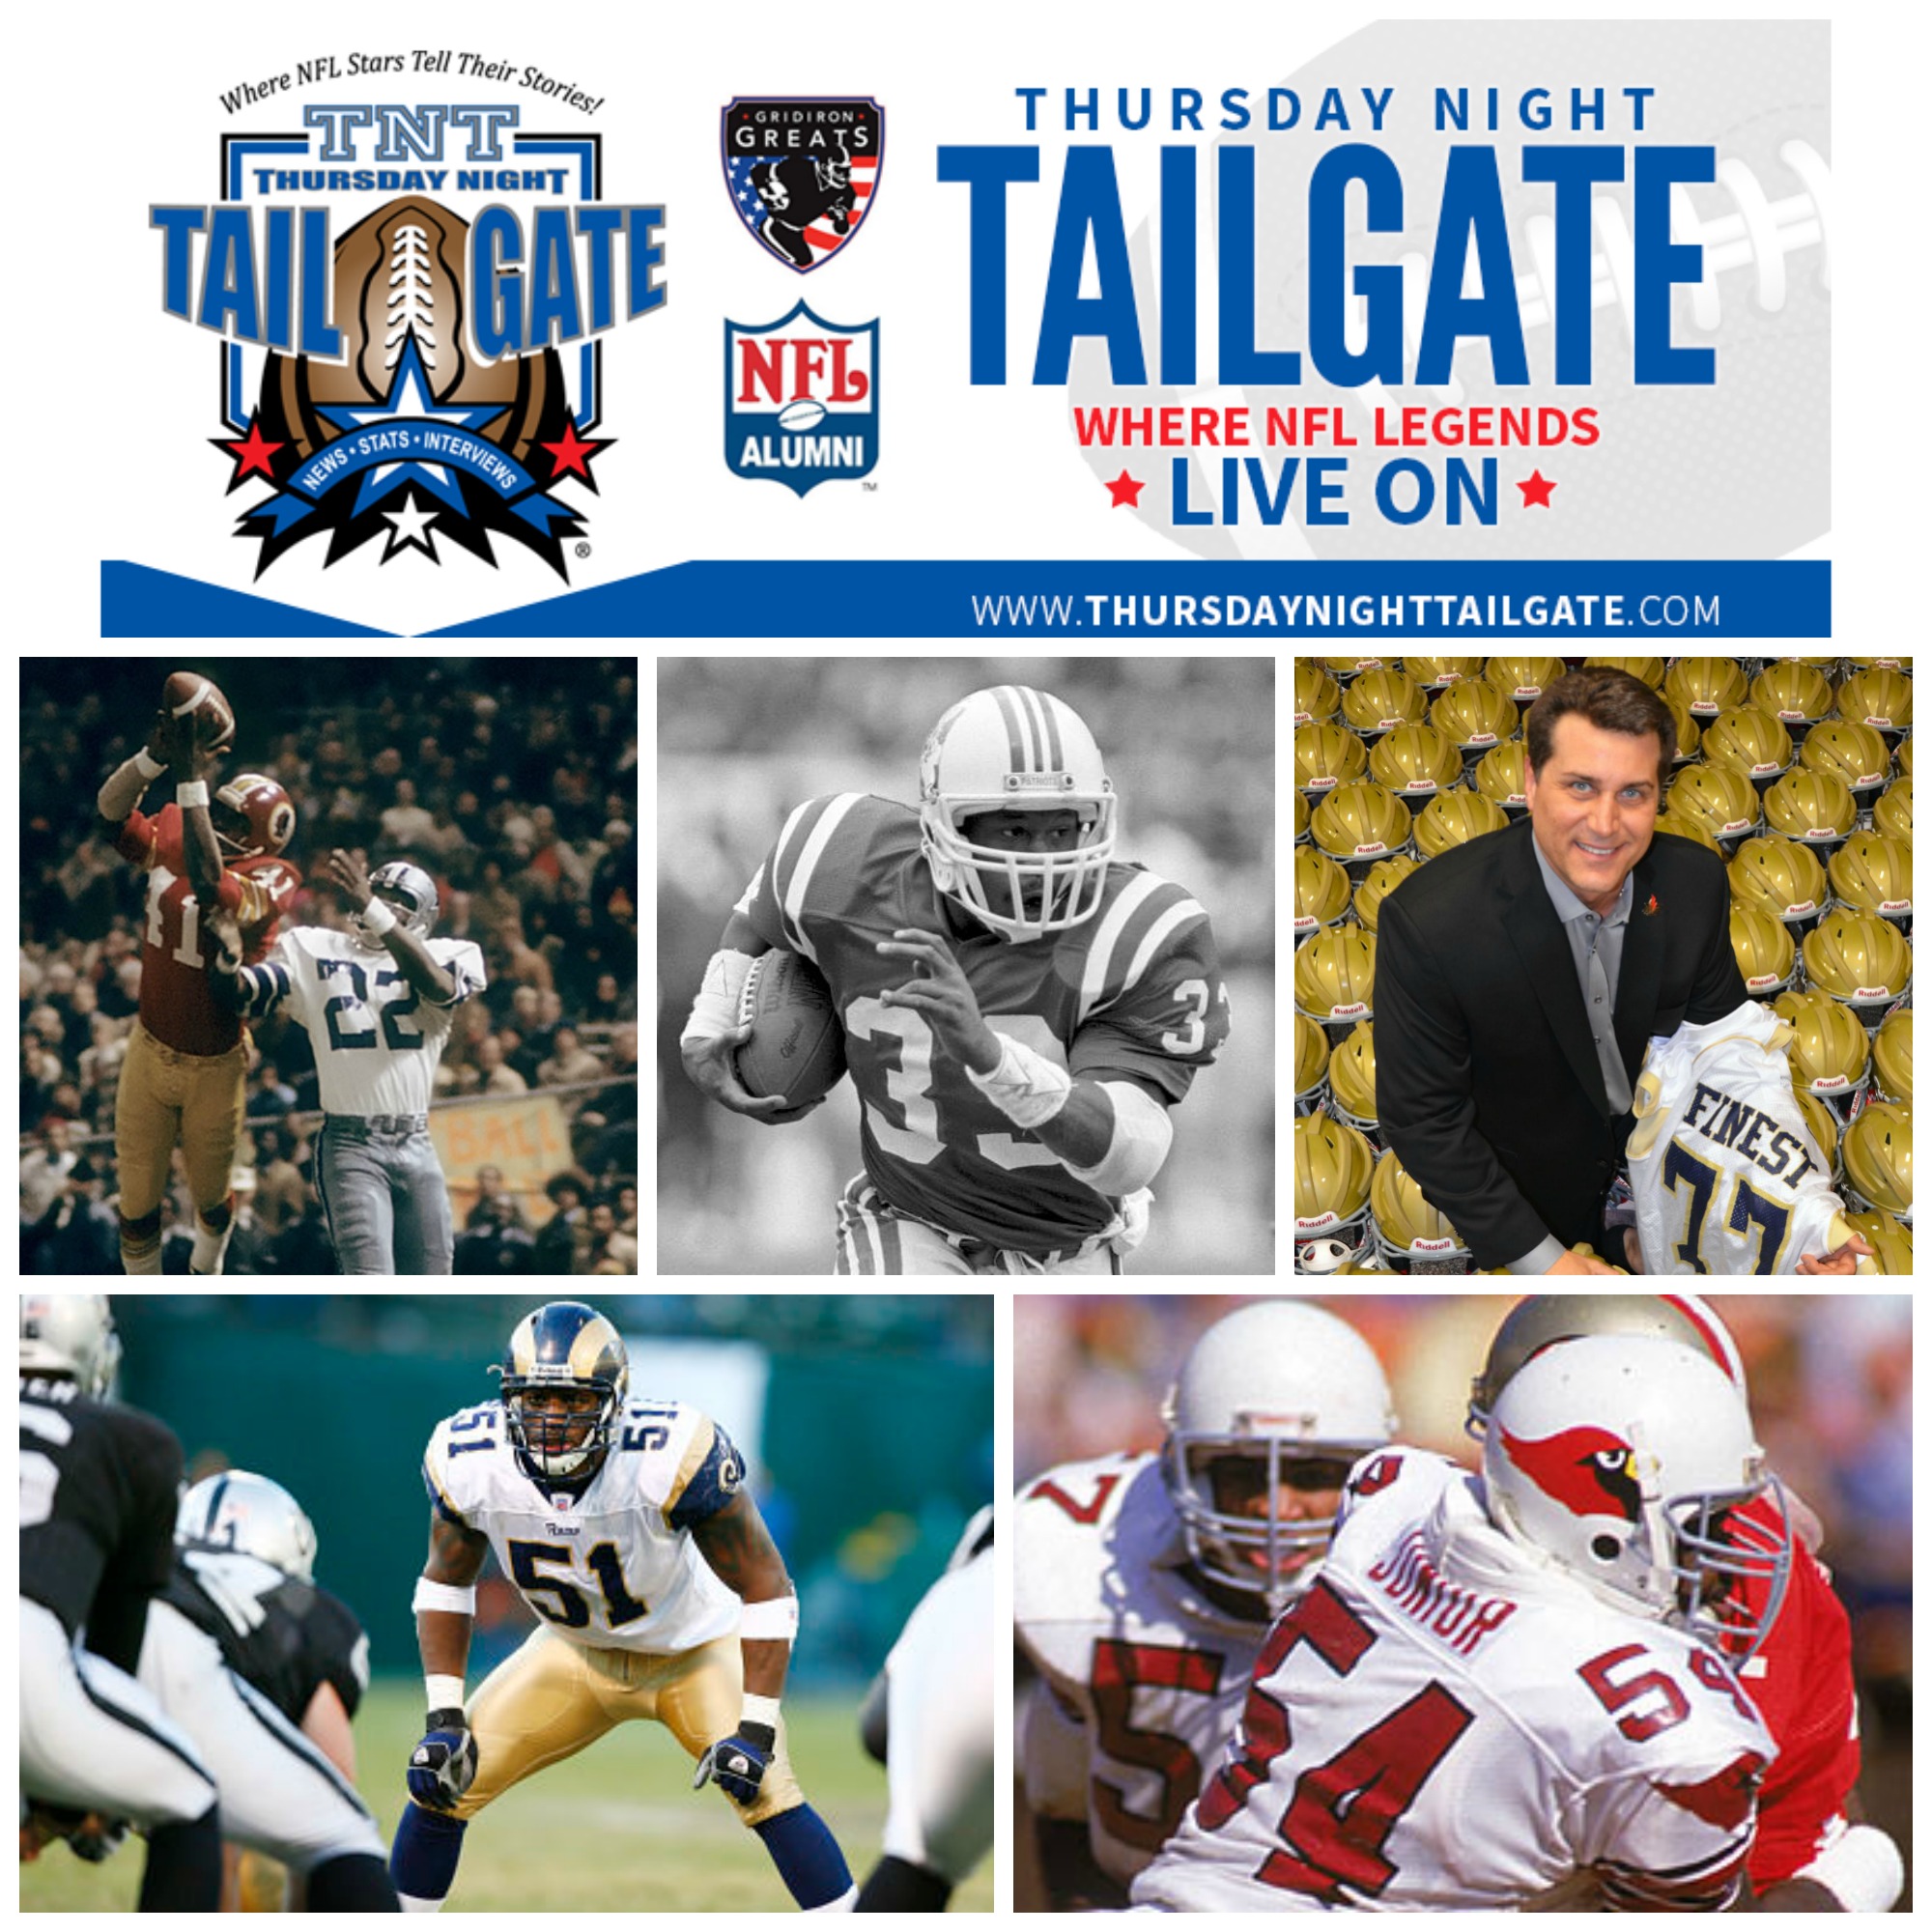 Mike Bass, Tony Collins, Dr. Steven Novicky, Will Witherspoon, & E.J. Junior join us on this edition of Thursday Night Tailgate